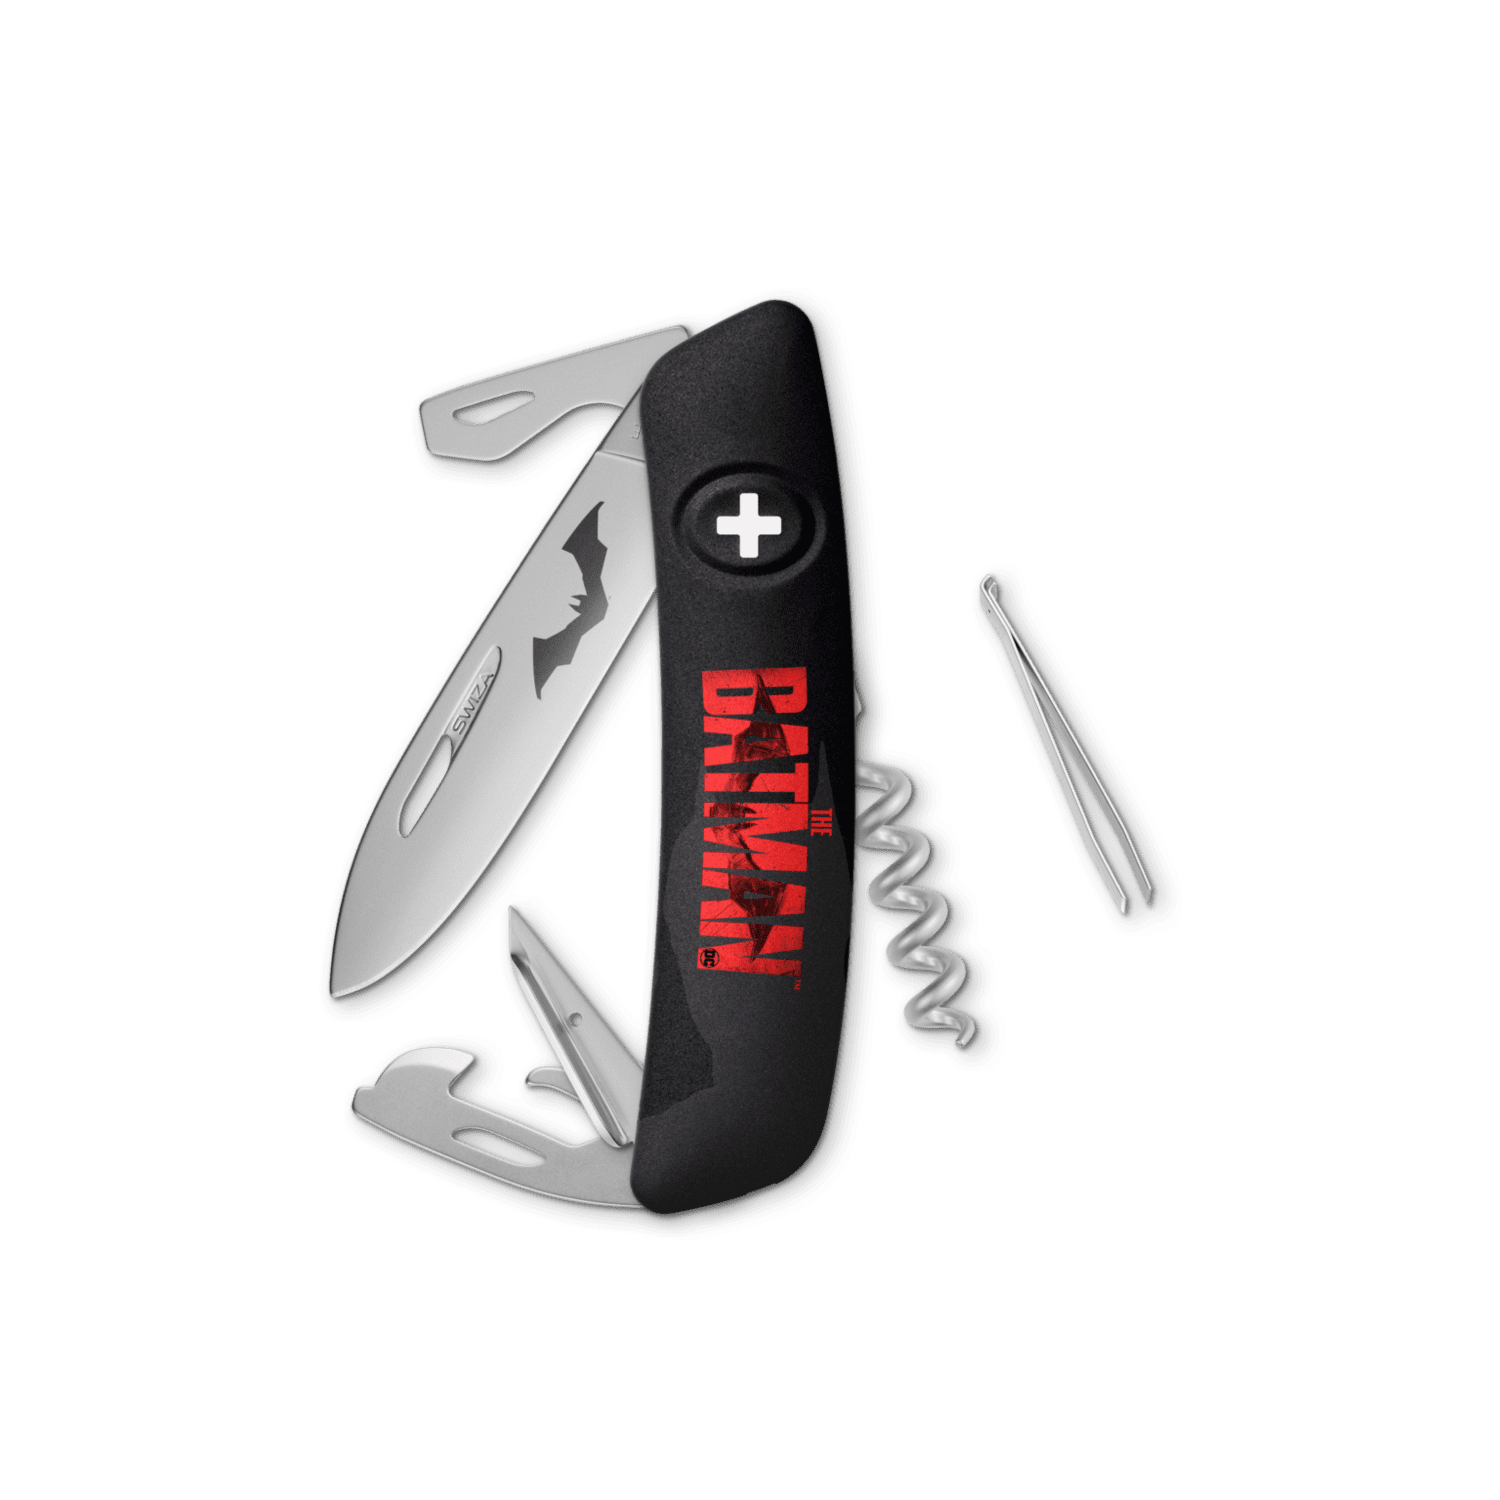 All About You - SWIZA® | AUTHENTIC SWISS KNIFE